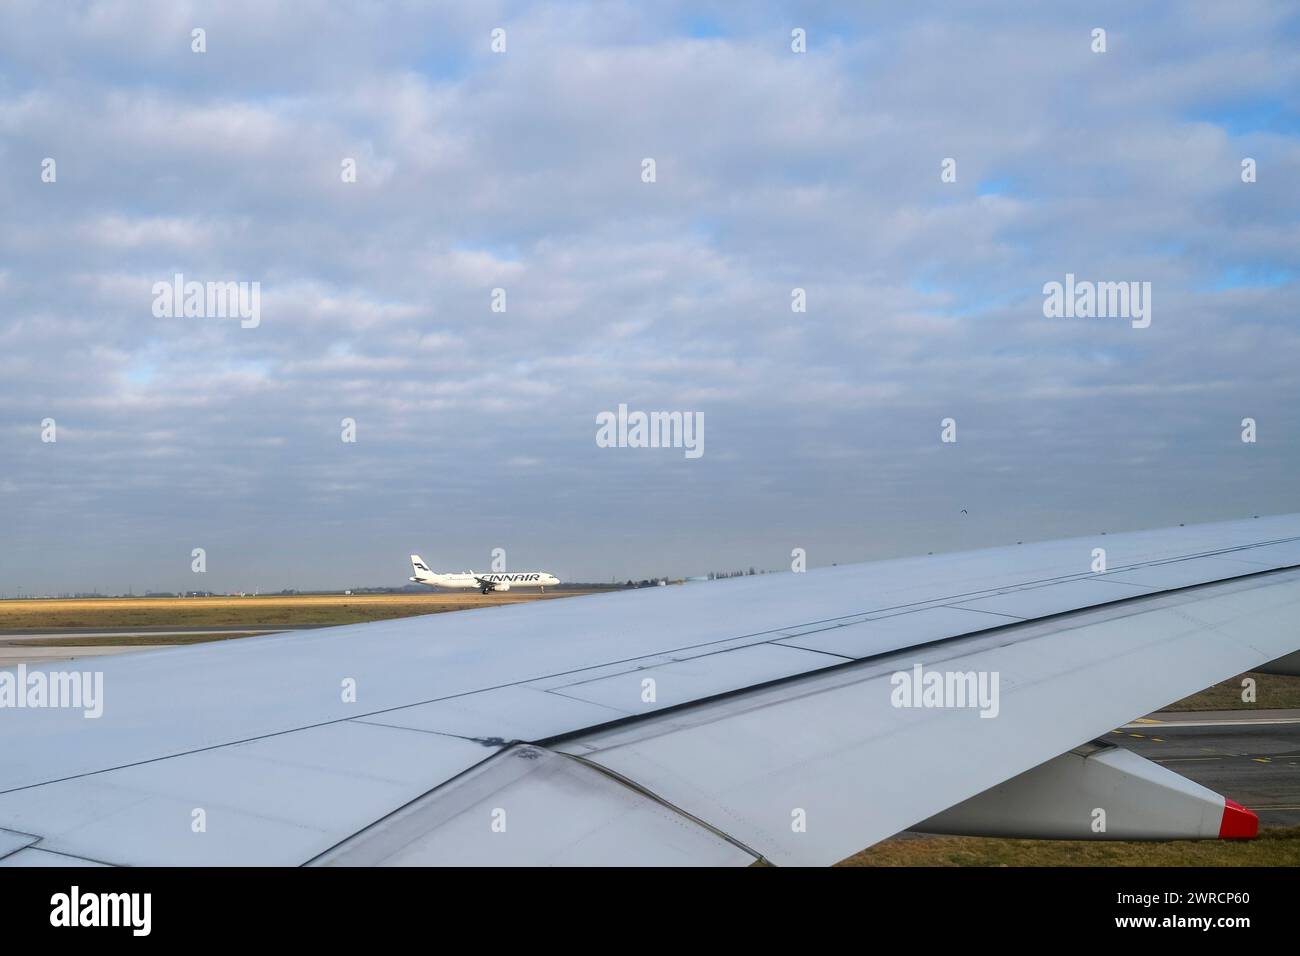 A Finnair airplane seen above the wing of another aeroplane Stock Photo